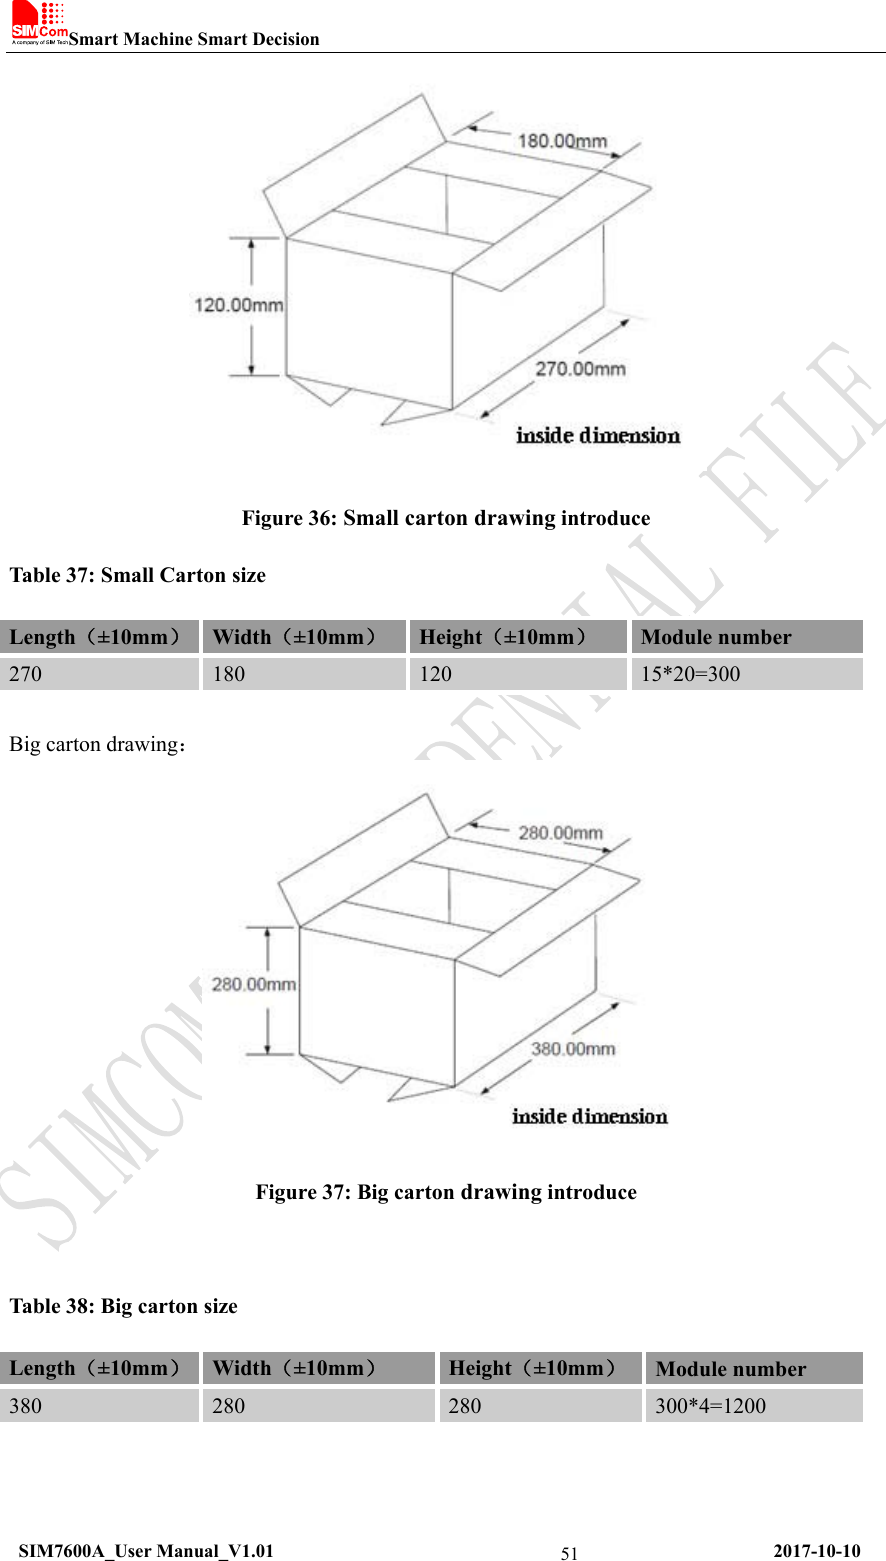 Smart Machine Smart Decision  SIM7600A_User Manual_V1.01                                                     2017-10-10 51 Figure 36: Small carton drawing introduce Table 37: Small Carton size Length（±10mm） Width（±10mm） Height（±10mm） Module number 270  180  120  15*20=300  Big carton drawing：  Figure 37: Big carton drawing introduce  Table 38: Big carton size Length（±10mm） Width（±10mm） Height（±10mm）Module number 380  280  280  300*4=1200   